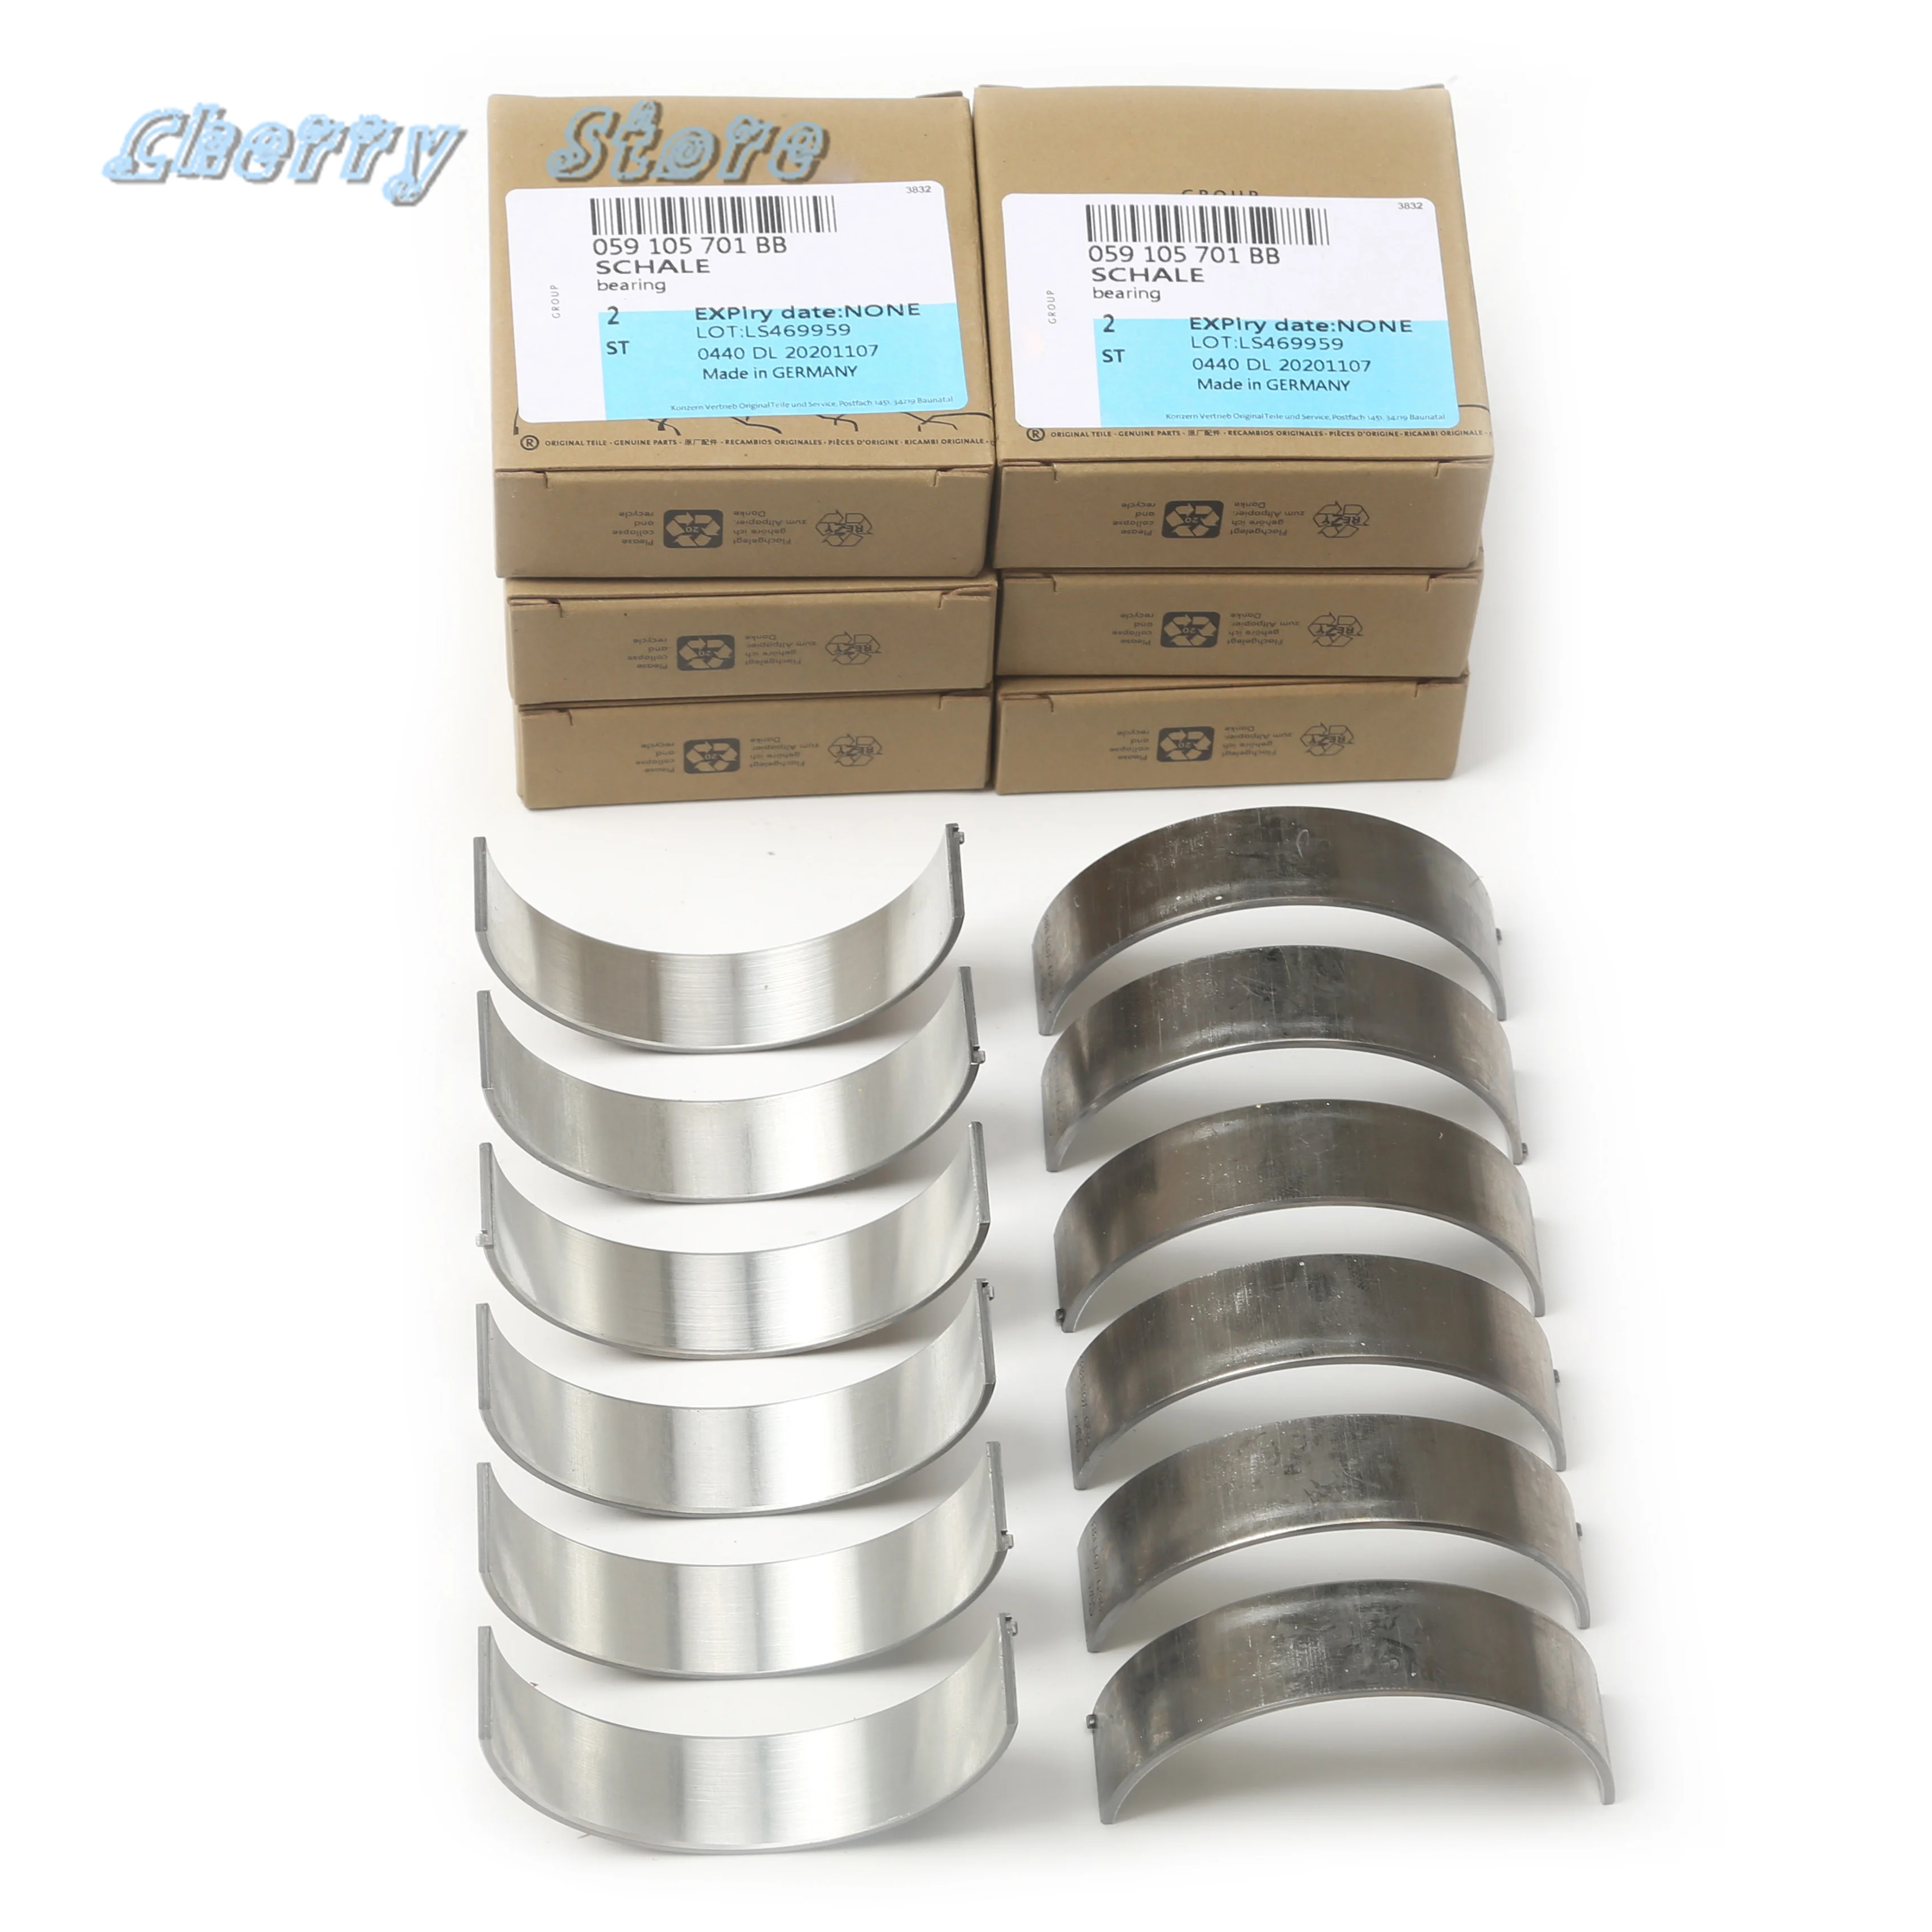 

Engine Connecting Rod Bearings Kit For Audi A4 S4 S5 Coupe 3.0TDI CLAB CDUC CKVB A6 Allroad Quattro A8 059105701BC